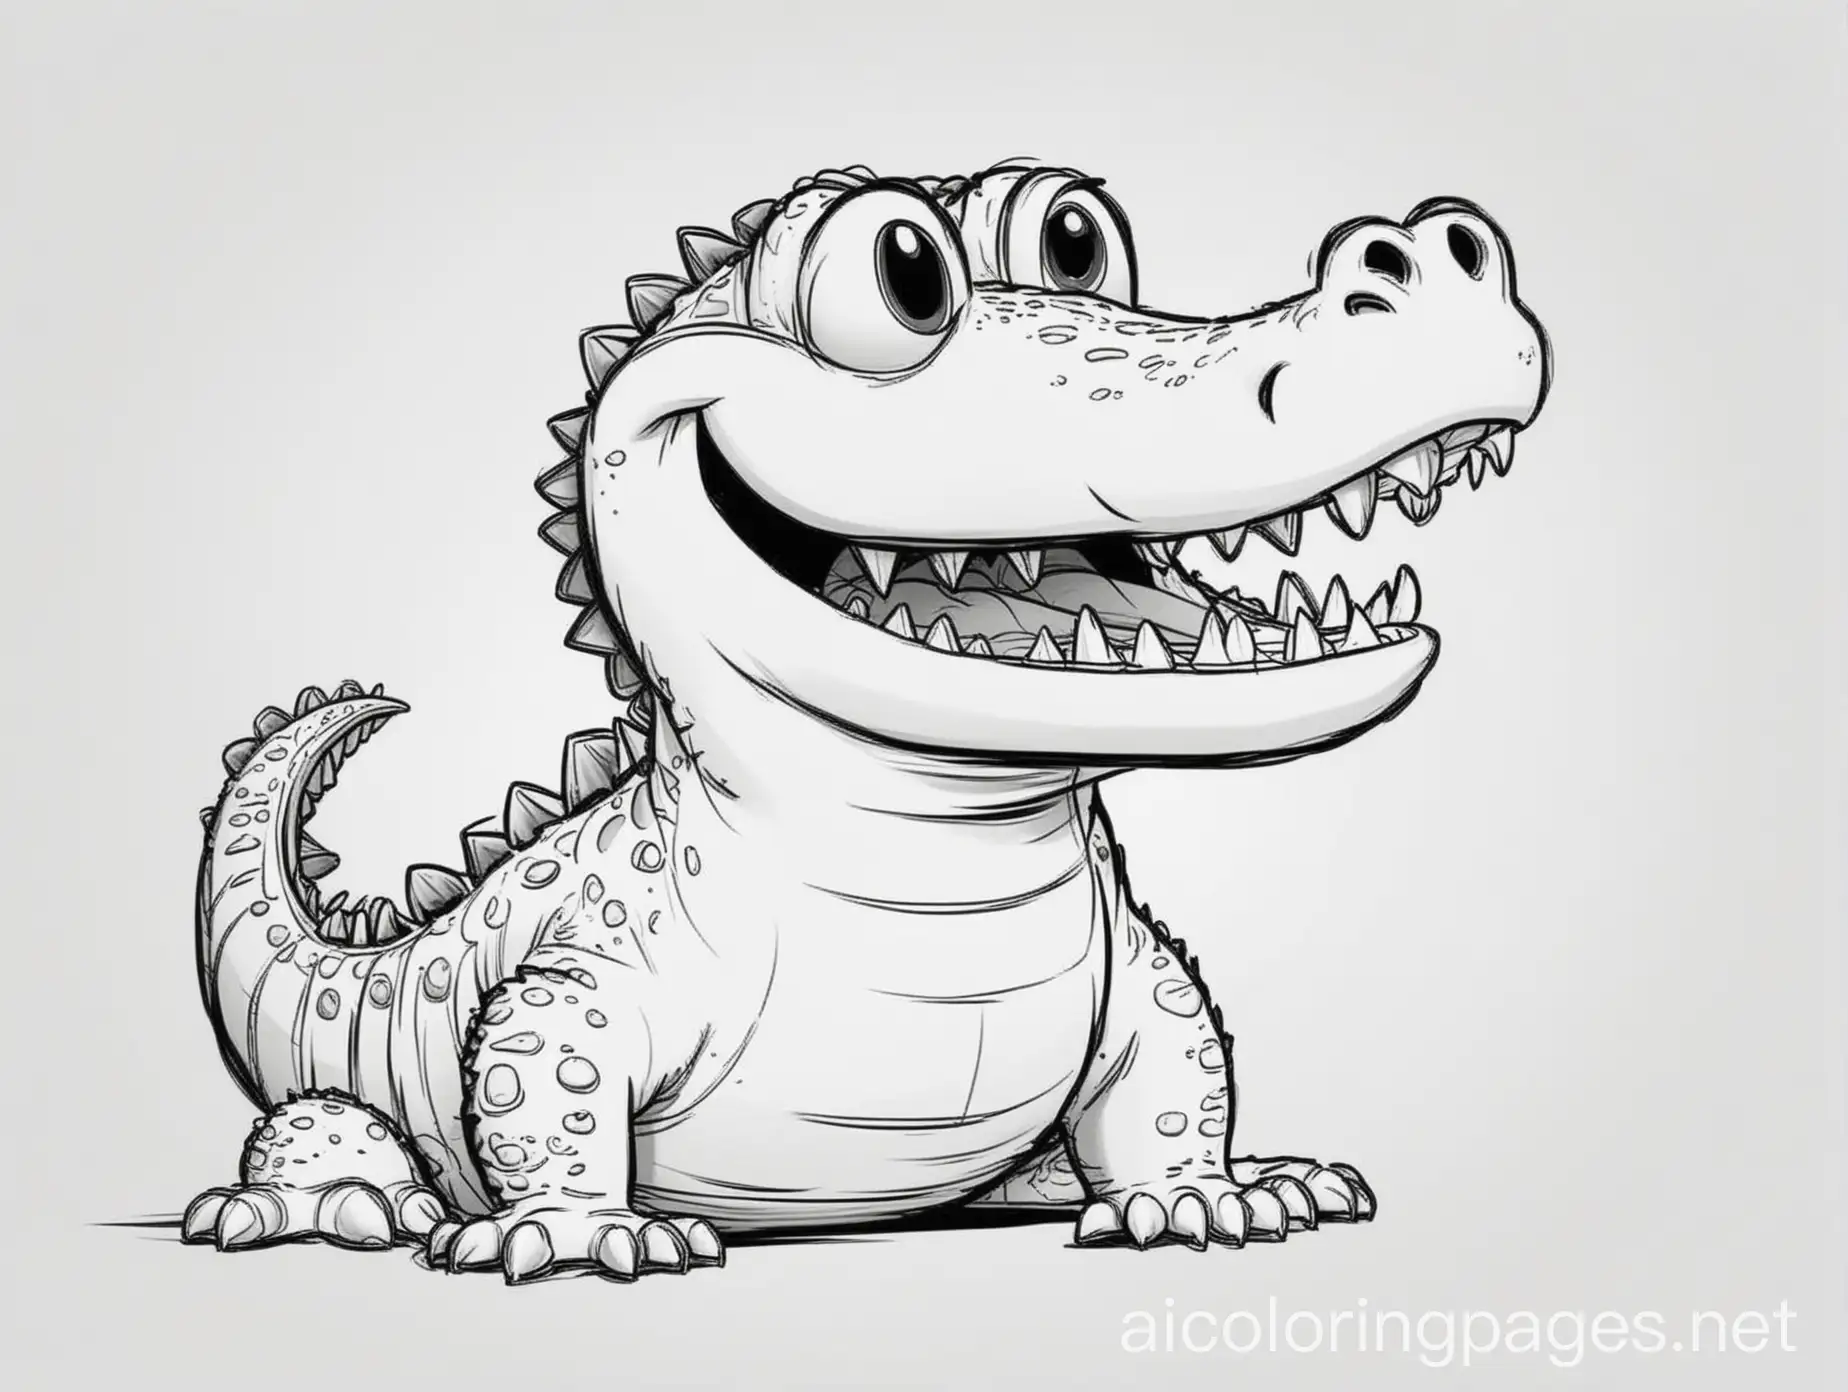 cartoon happy alligator, Coloring Page, black and white, line art, white background, Simplicity, Ample White Space. The background of the coloring page is plain white to make it easy for young children to color within the lines. The outlines of all the subjects are easy to distinguish, making it simple for kids to color without too much difficulty